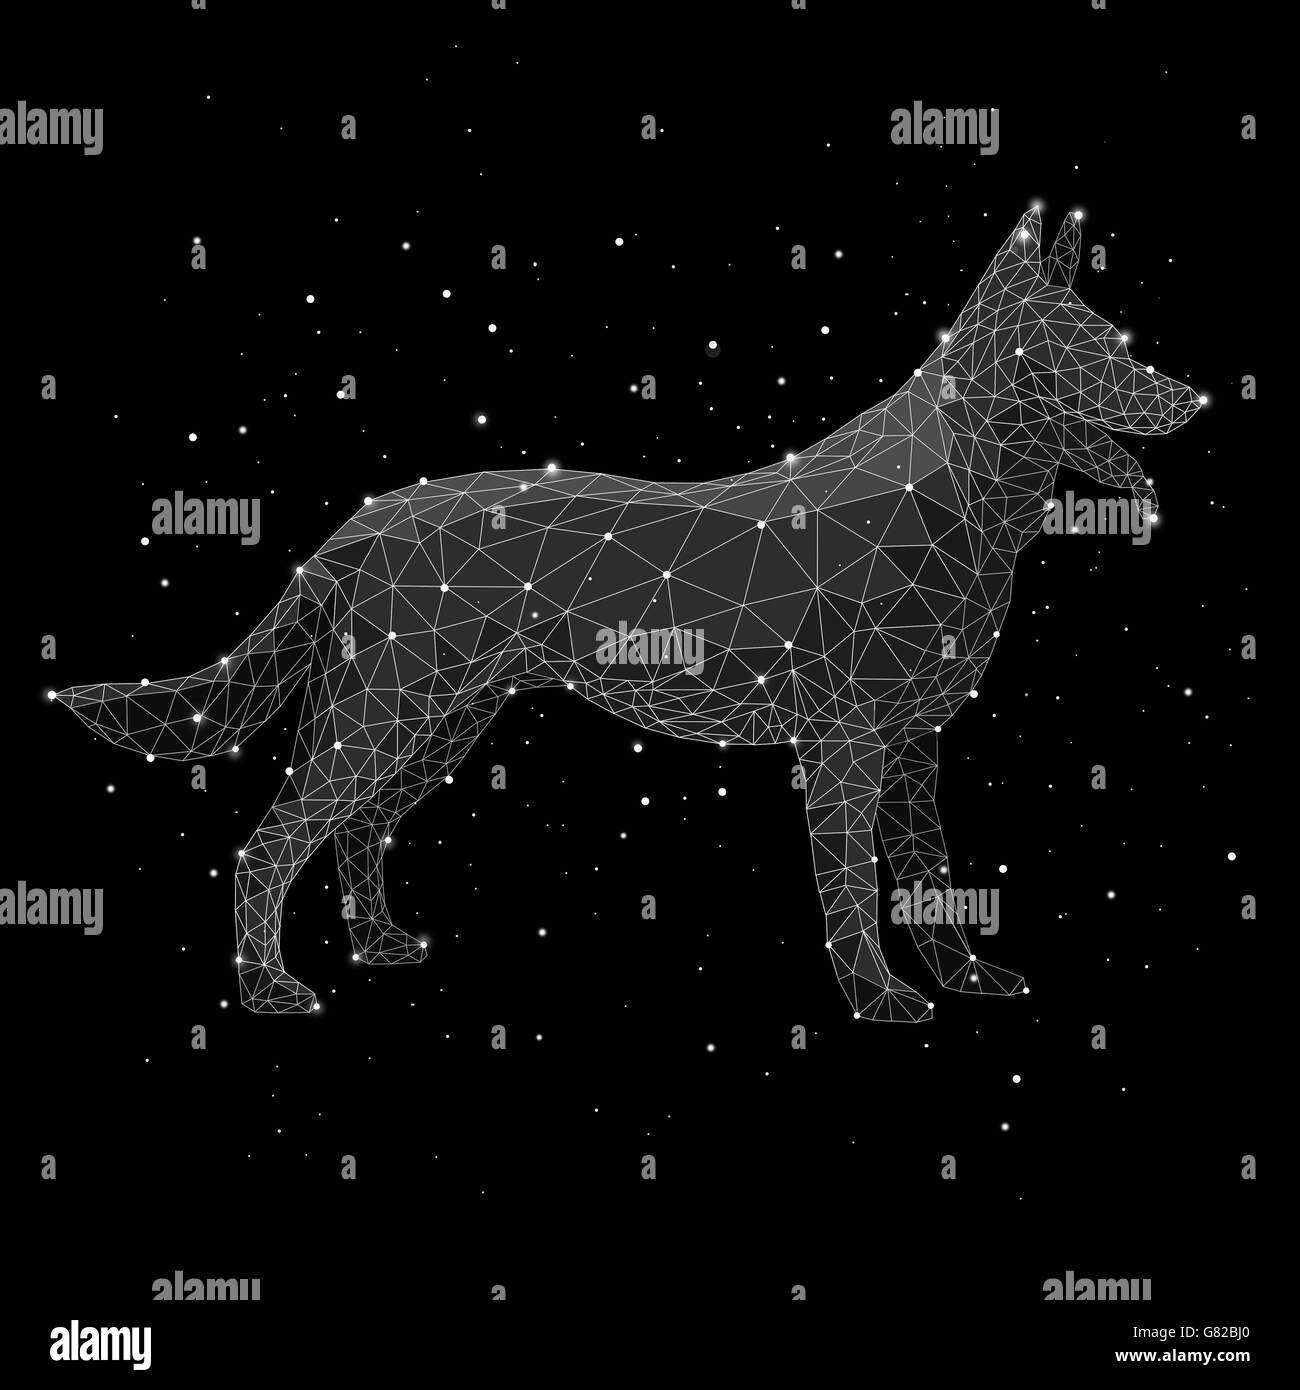 Digital composite image of constellation forming wolf against black background Stock Photo